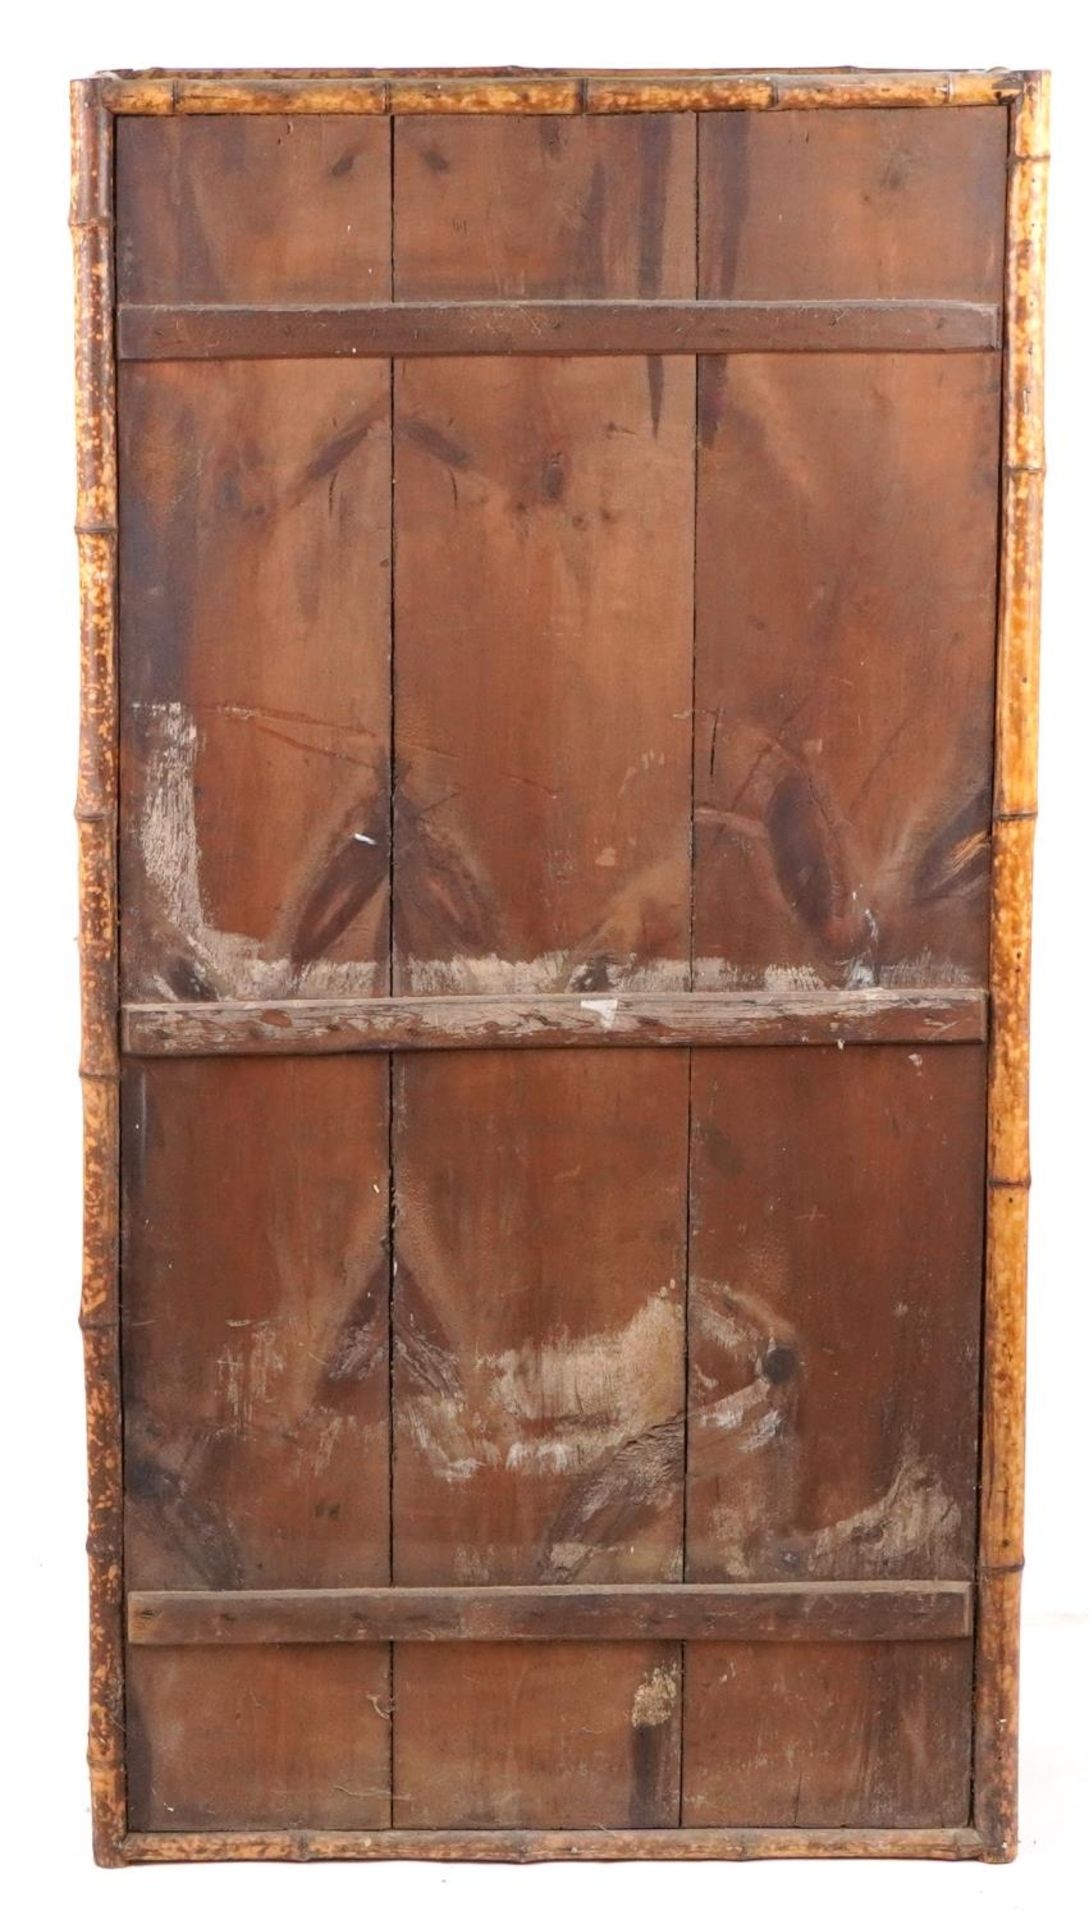 Victorian aesthetic bamboo and hessian style wardrobe with Japanned interior embossed C P - Image 4 of 5